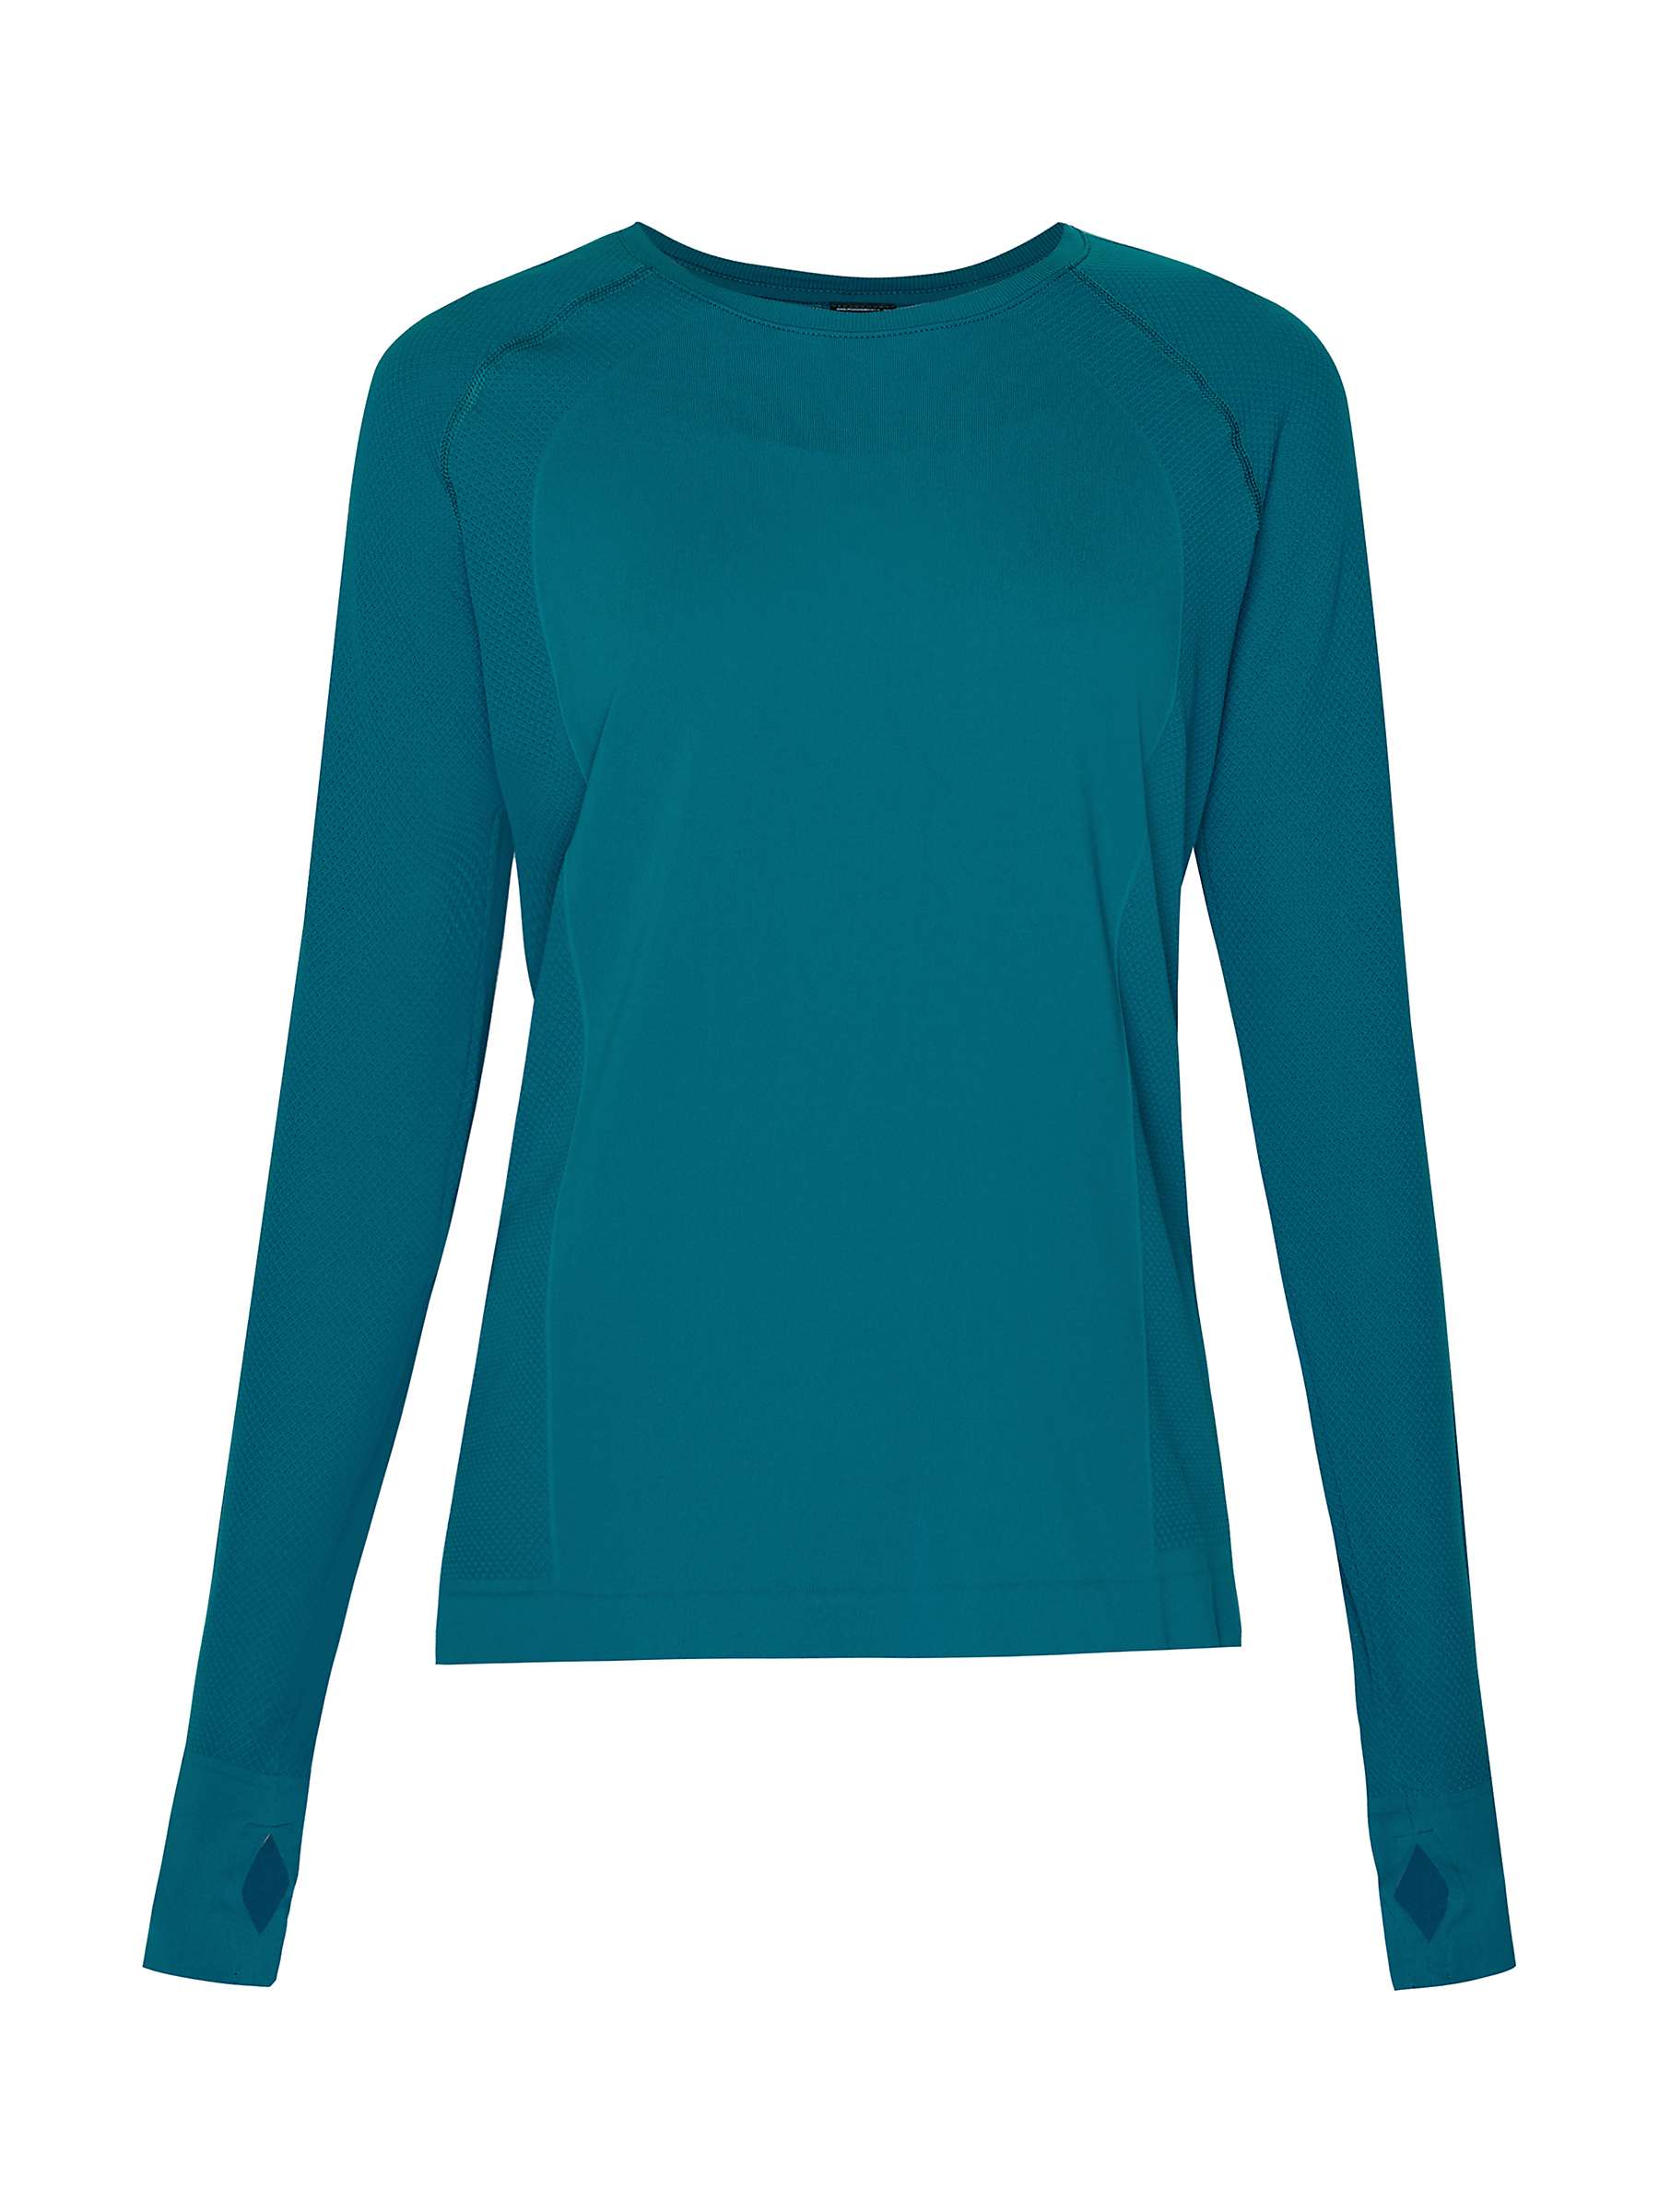 Buy Sweaty Betty Athlete Seamless Featherweight Long Sleeve Top Online at johnlewis.com